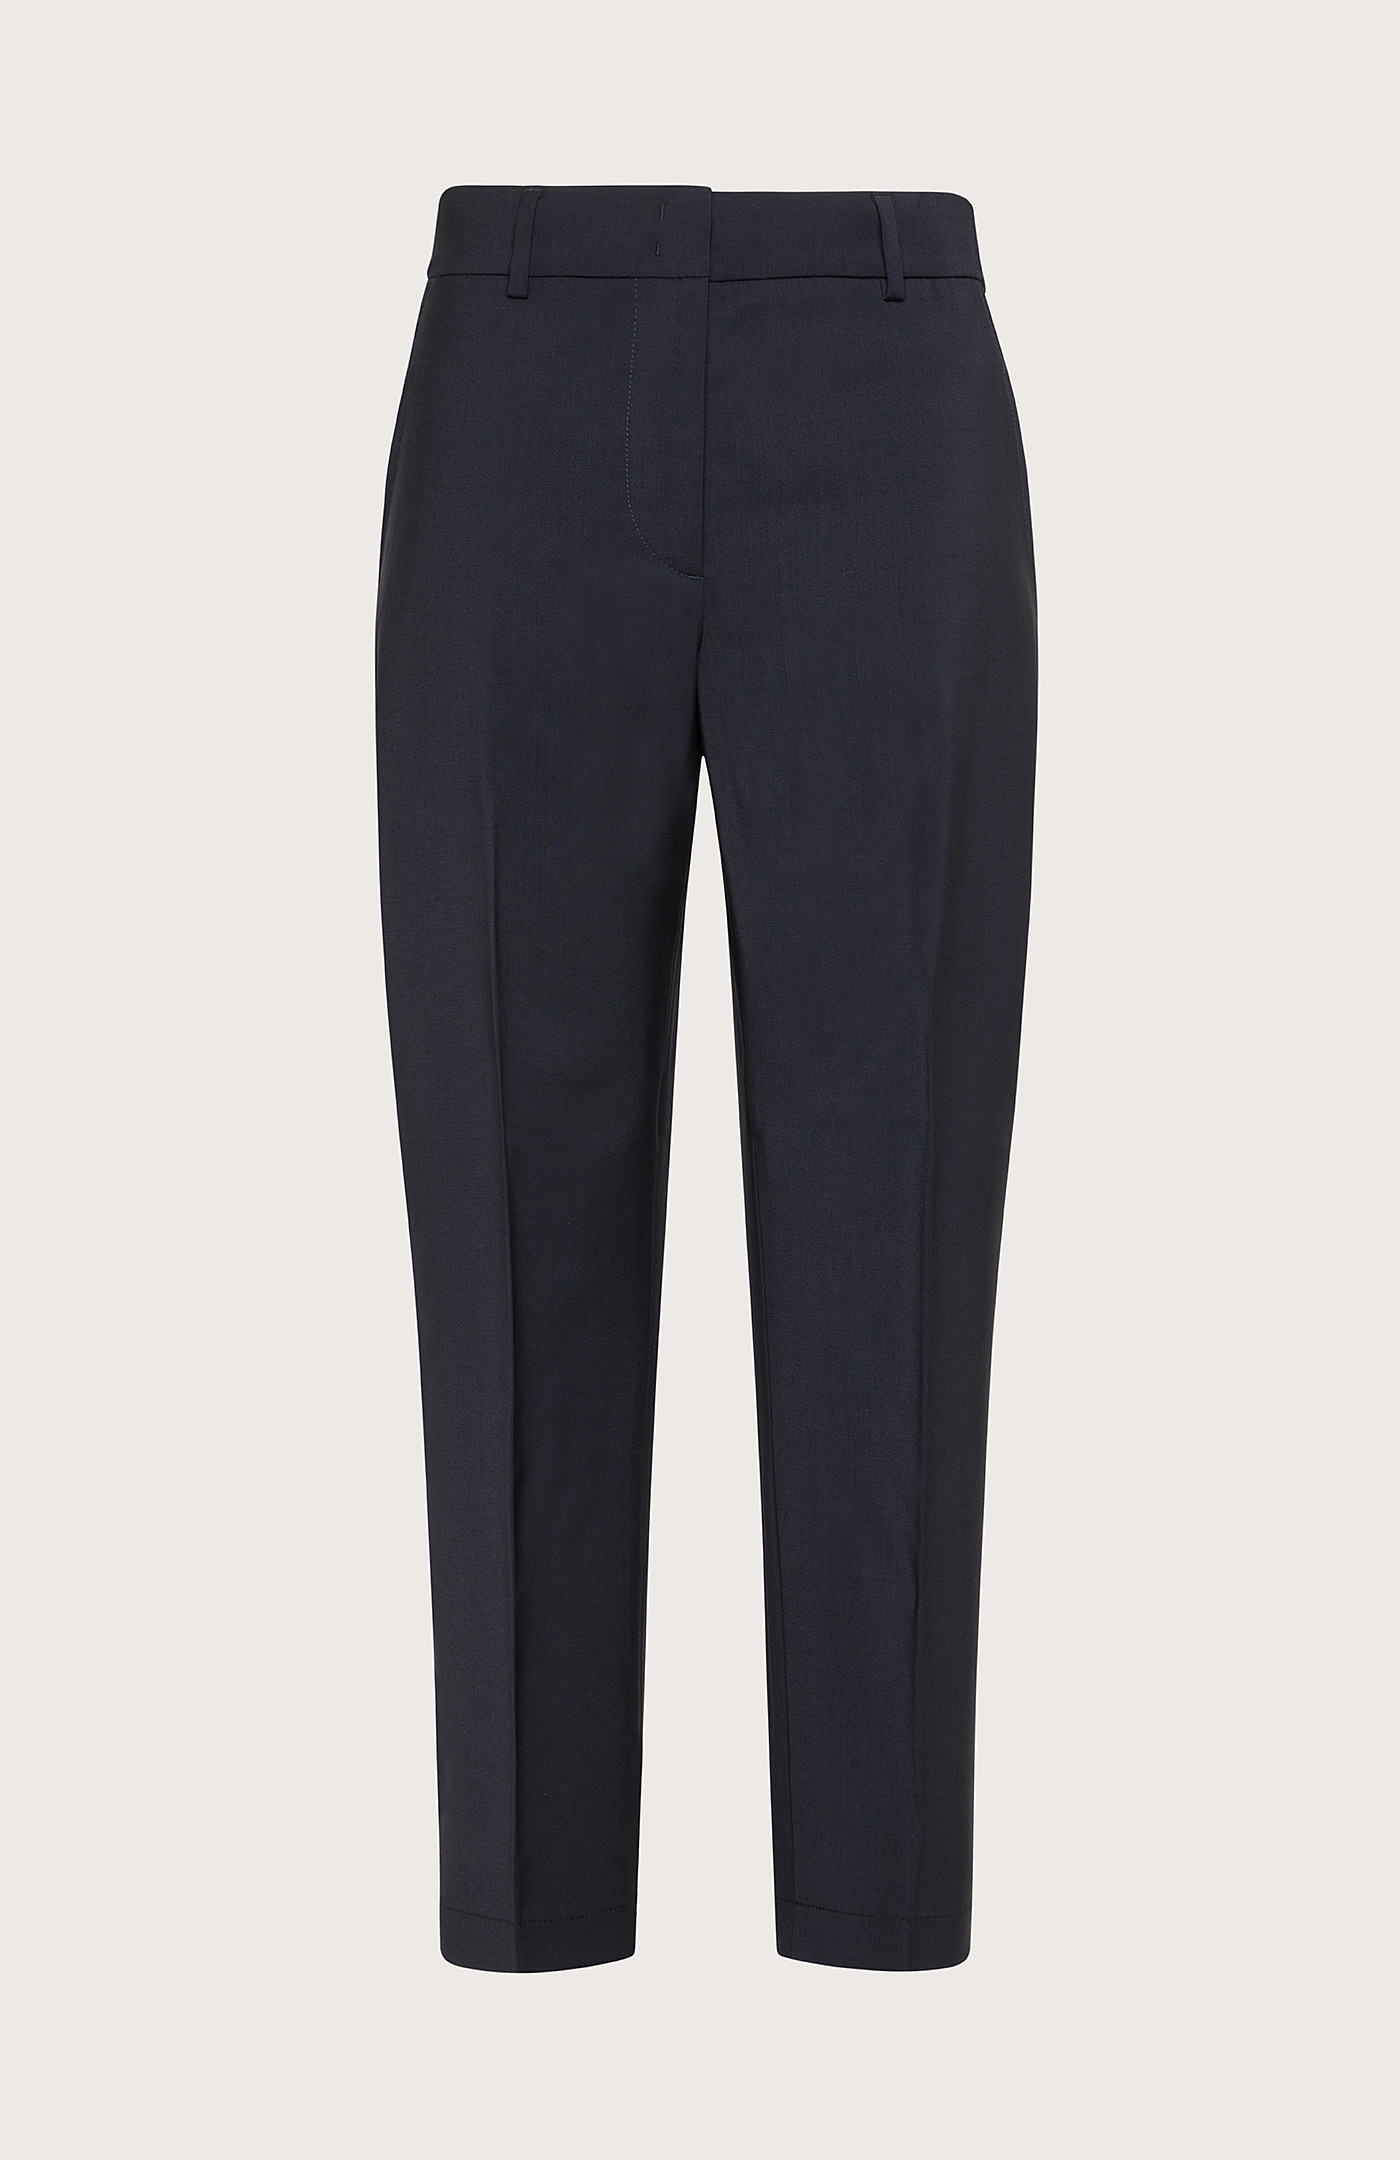 Buy Men Navy Solid Carrot Fit Casual Trousers Online - 804904 | Peter  England